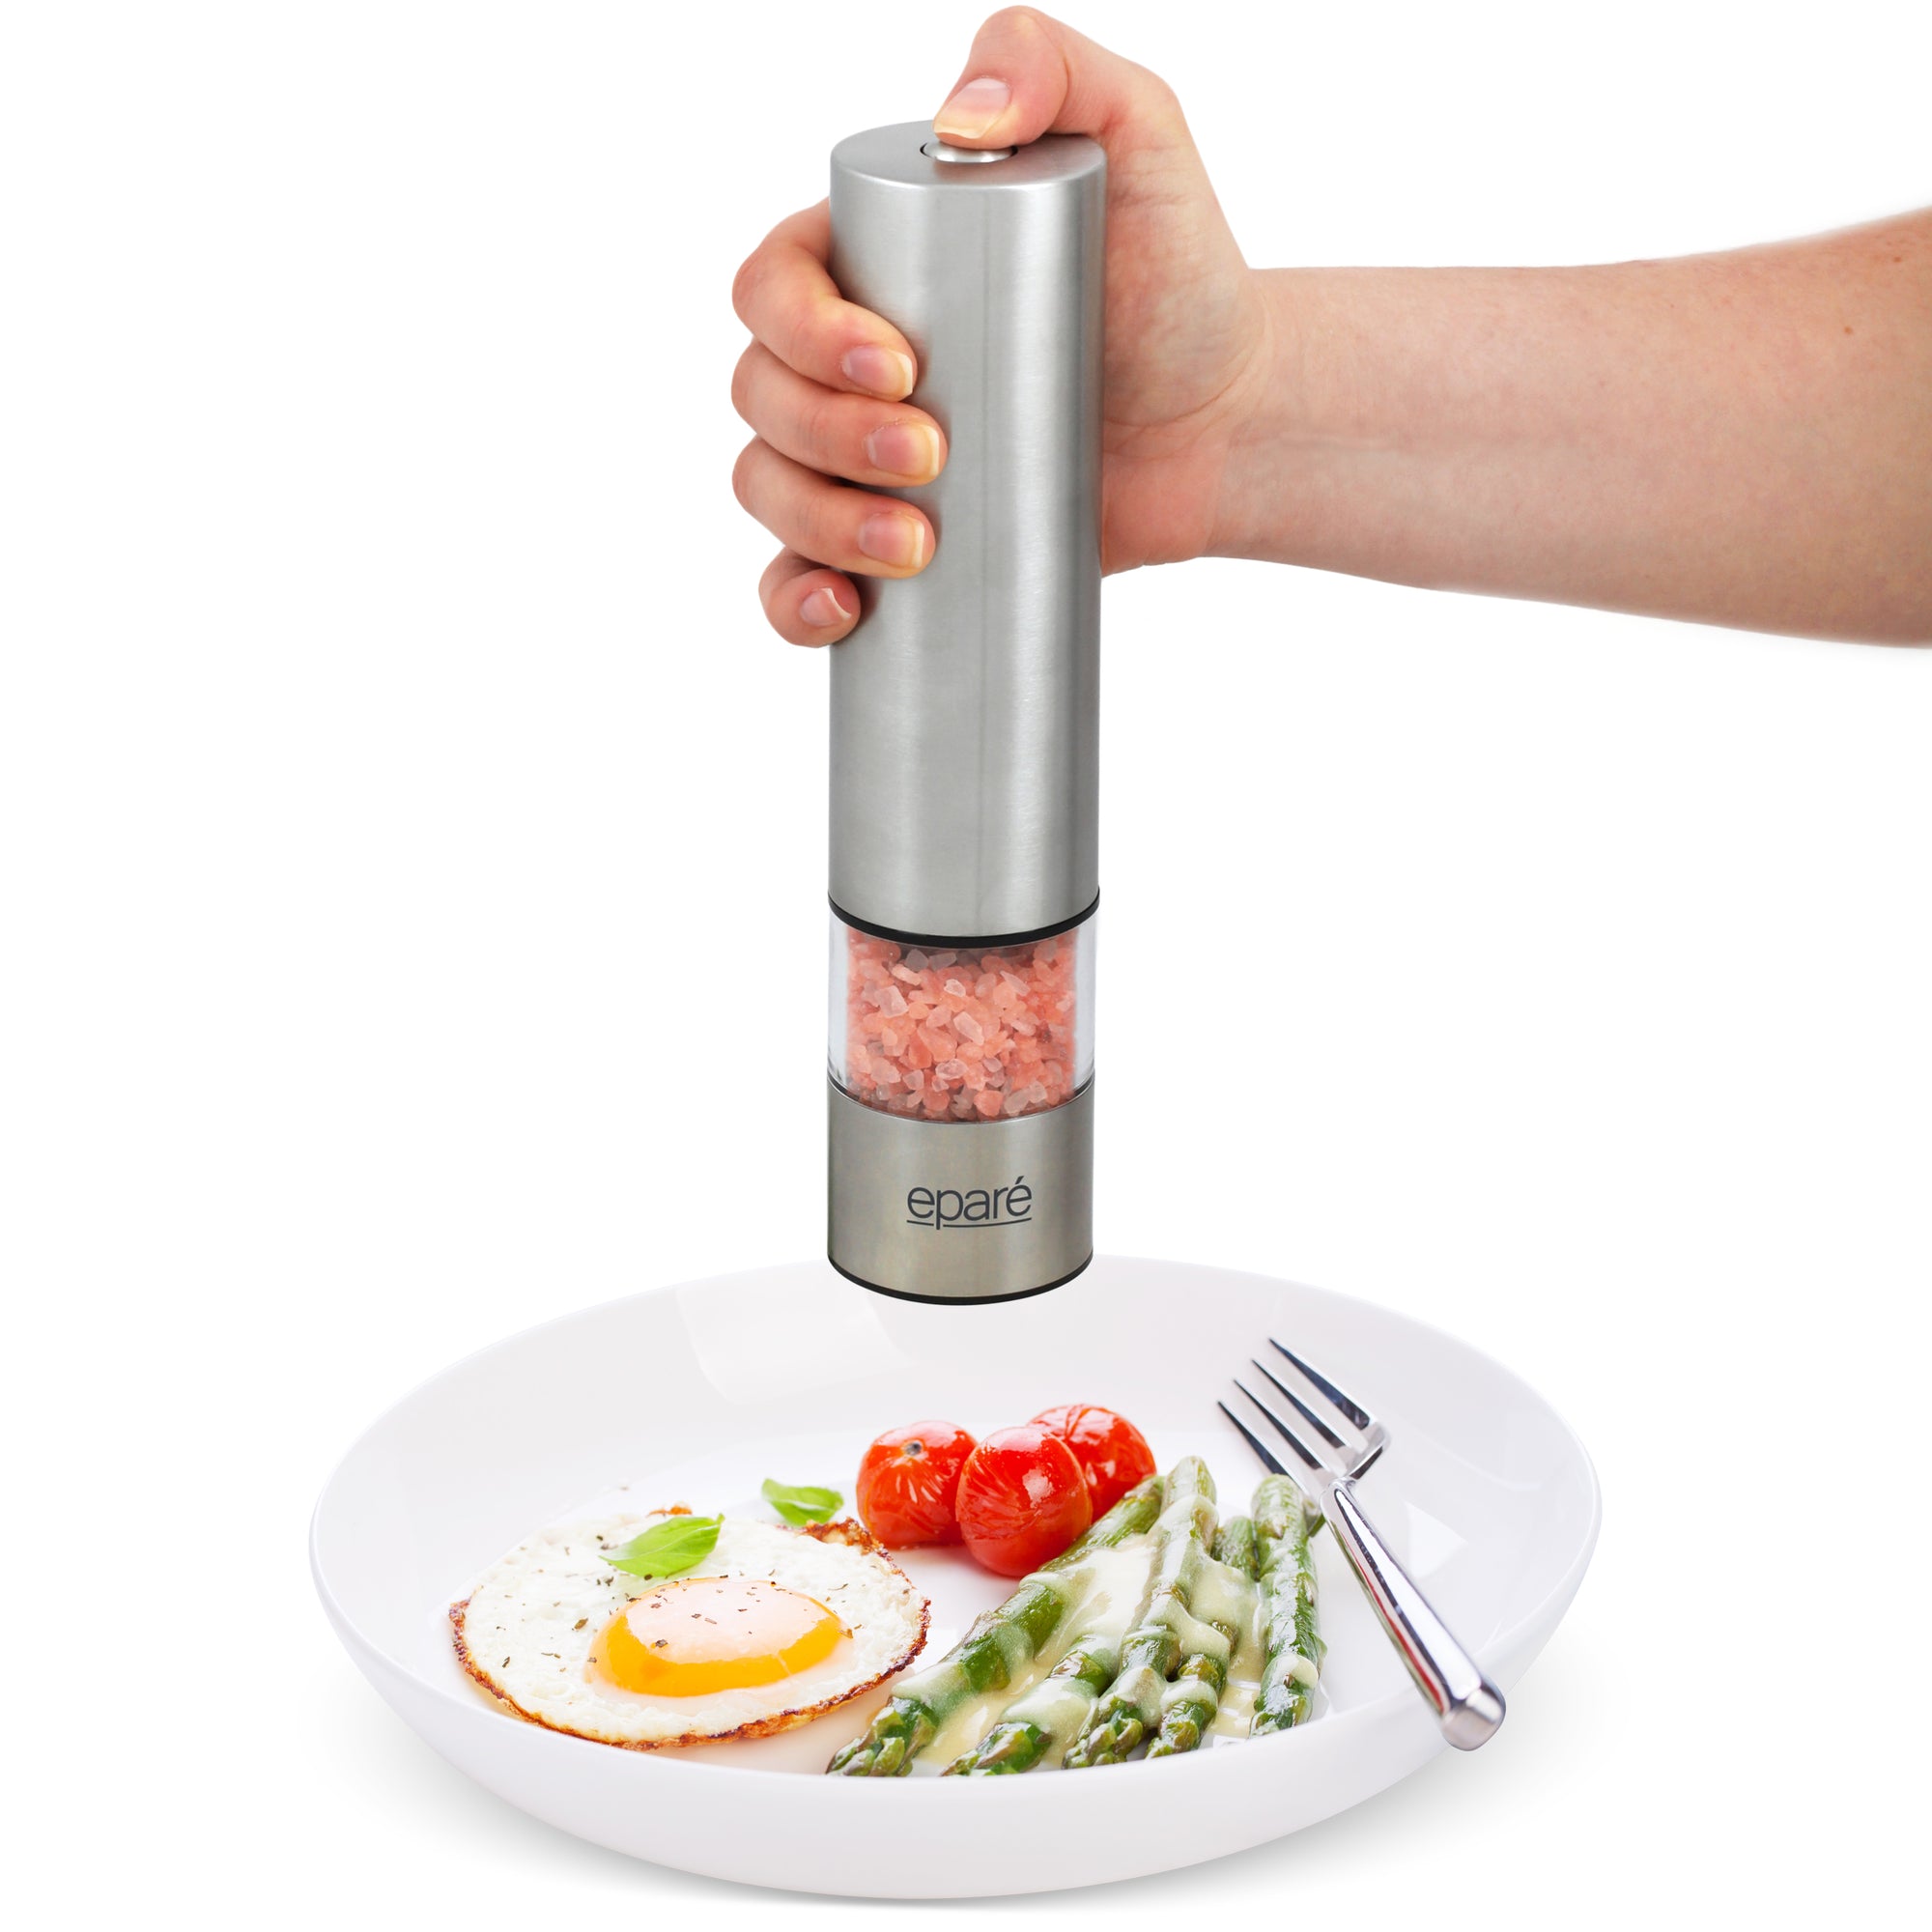 Battery Powered Stainless Steel Salt or Pepper Mill -Flafster Kitchen